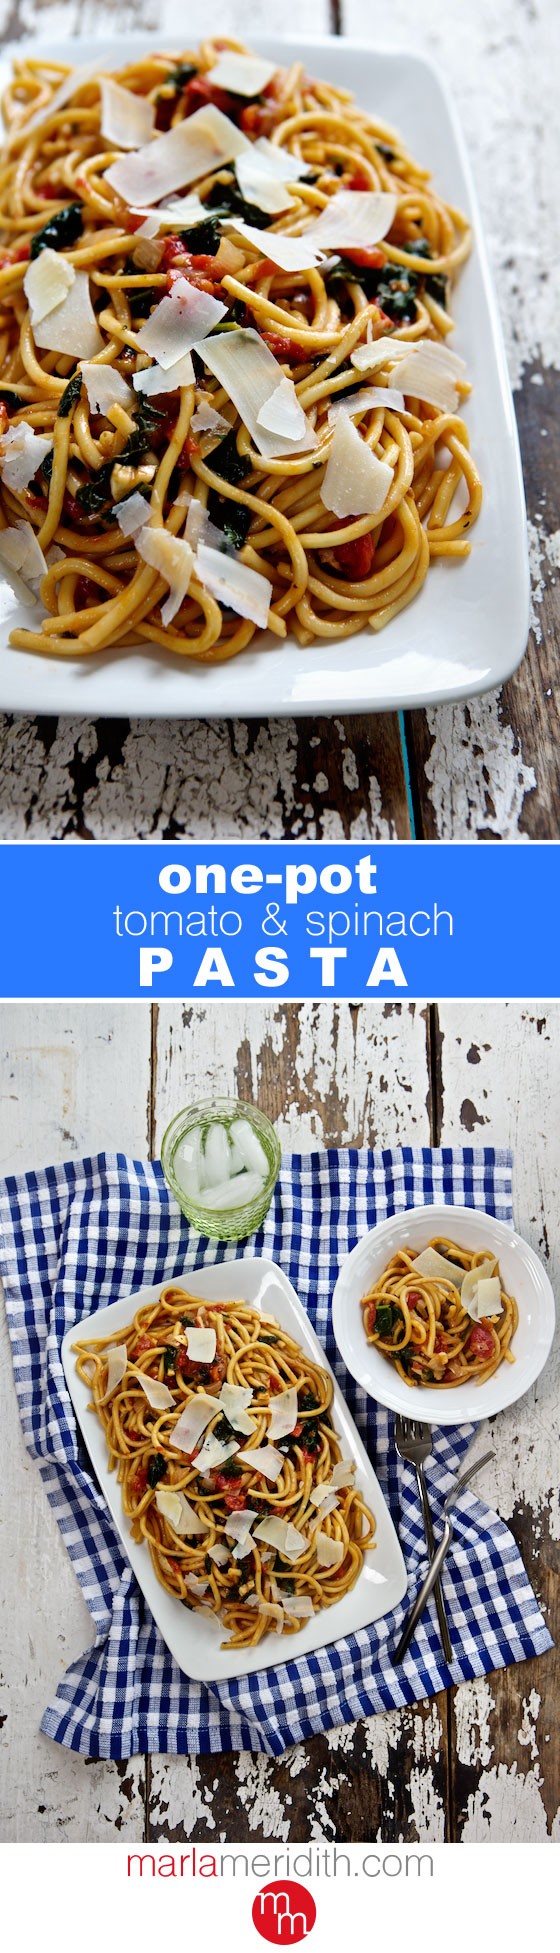 One-Pot Tomato & Spinach Pasta is a quick, convenient & delicious family meal! Great for the lunchbox too! MarlaMeridith.com ( @marlameridith )